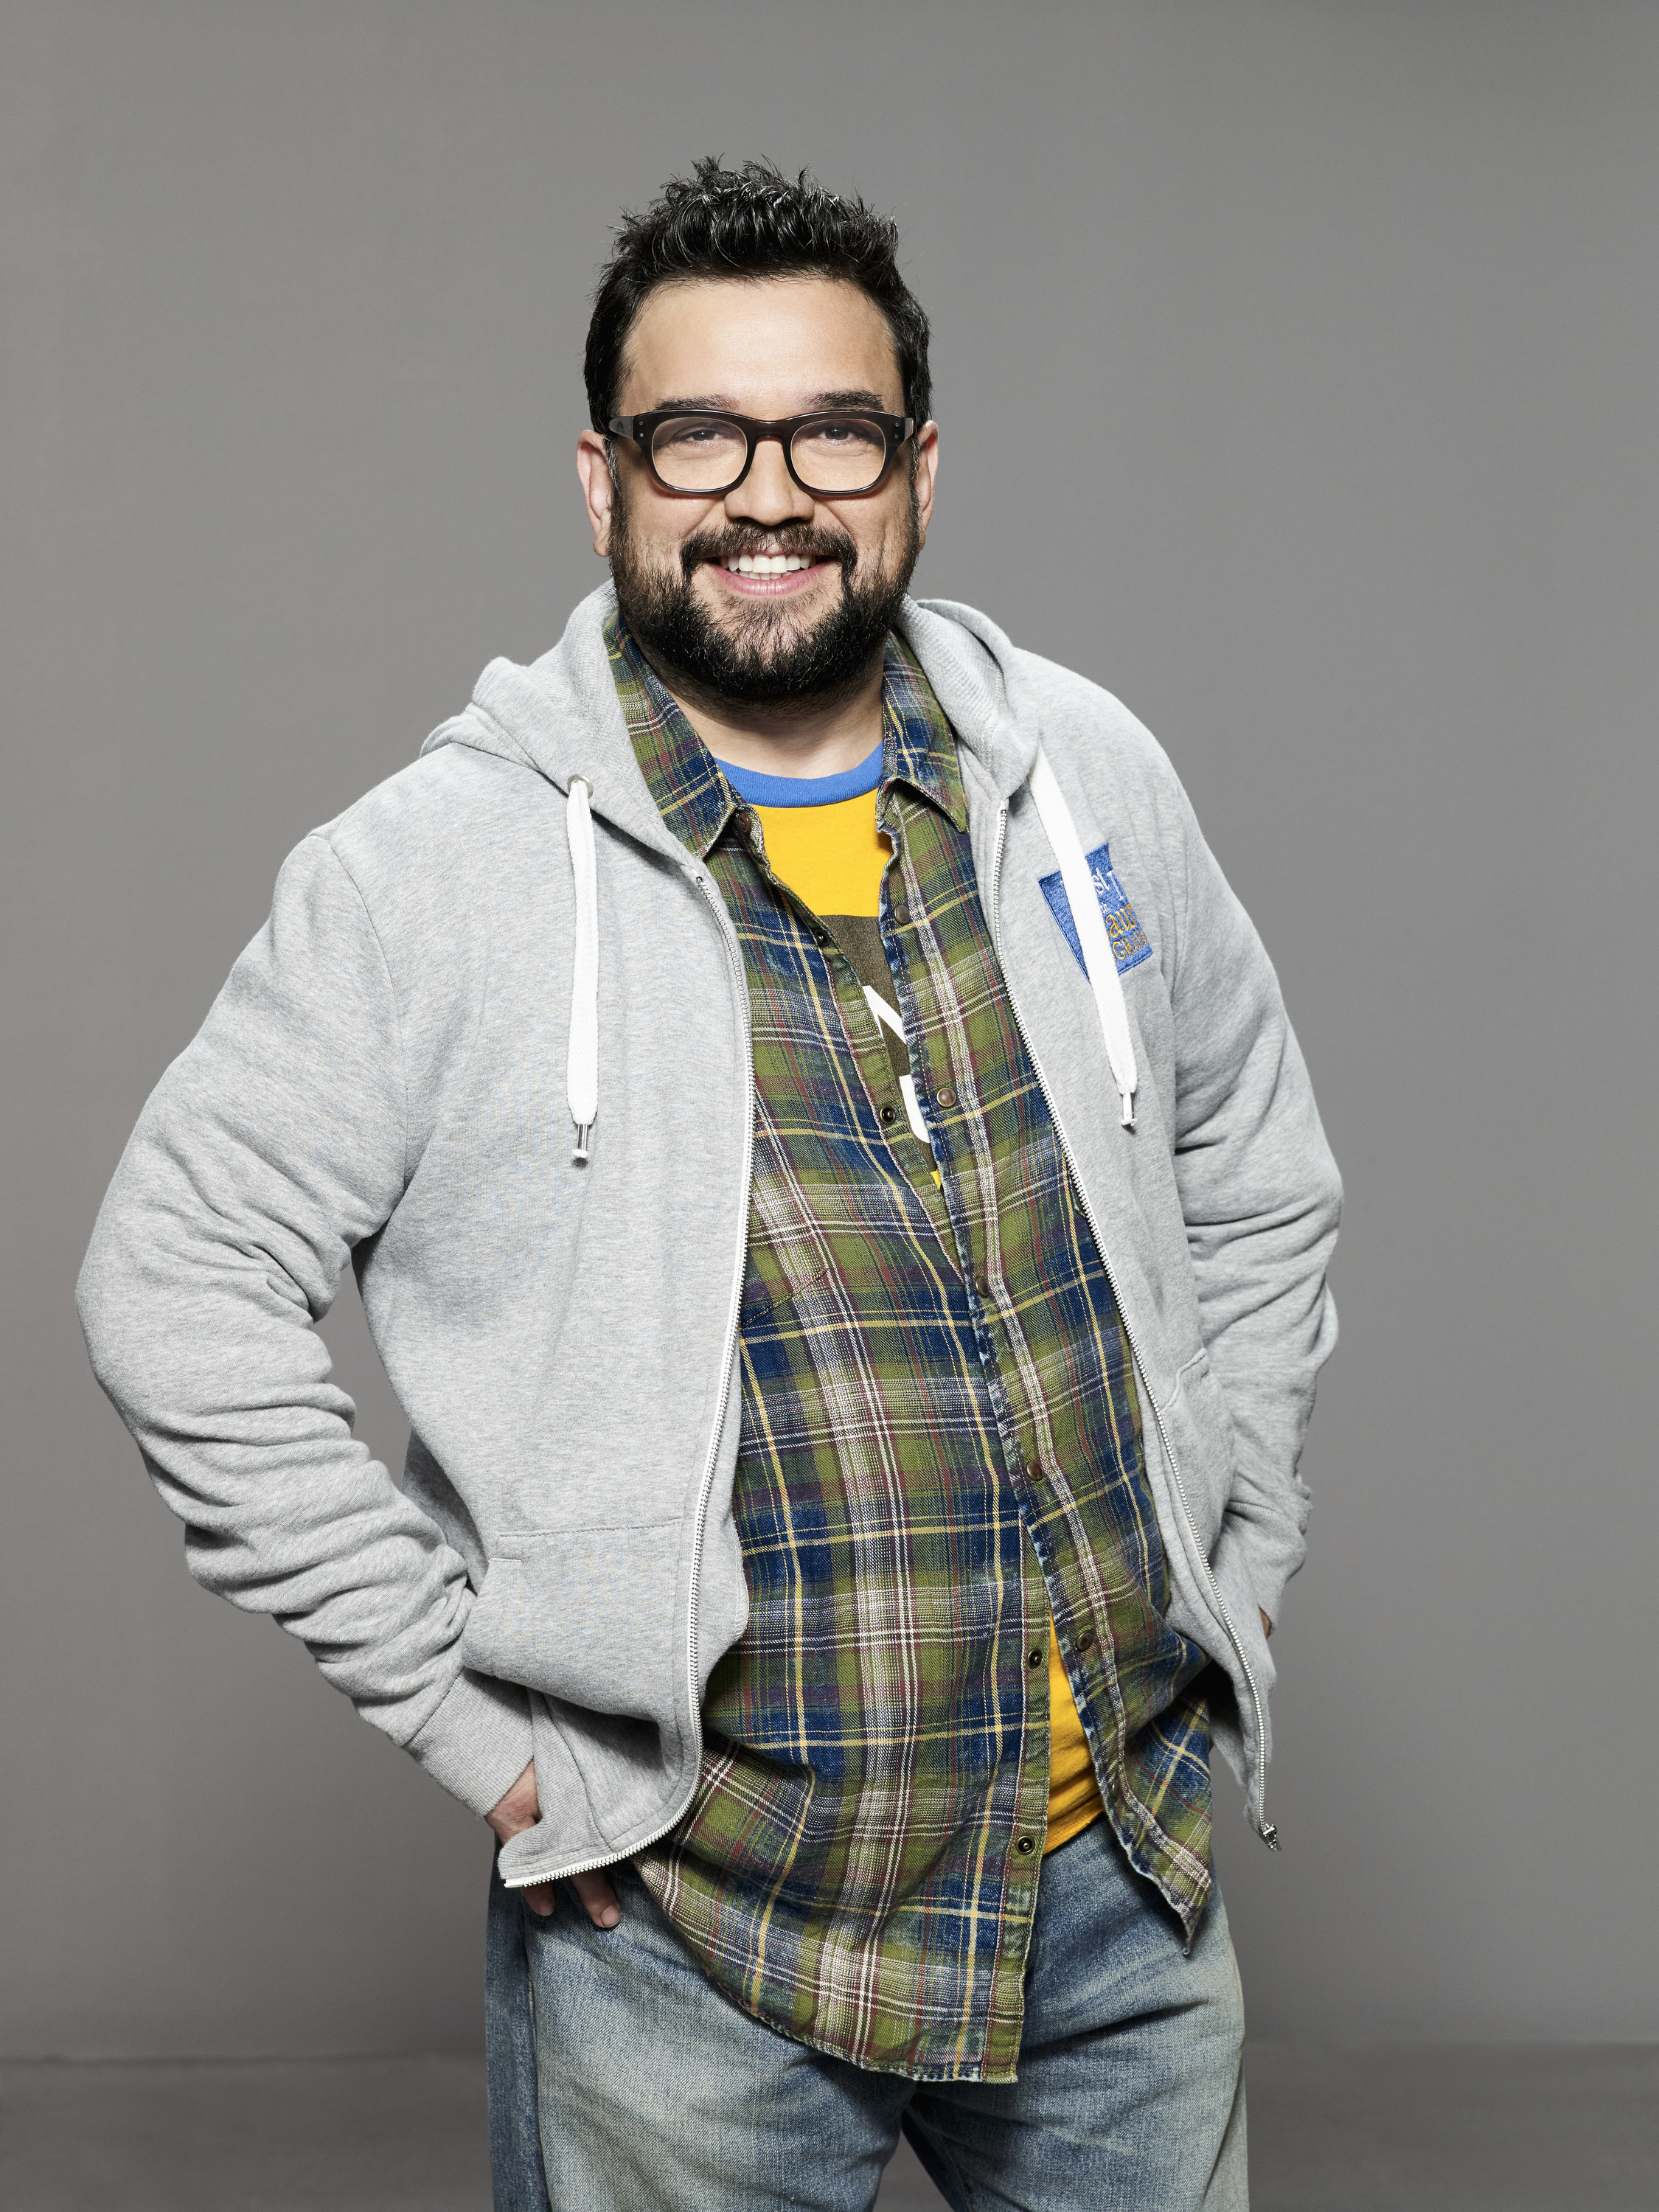 Sanz puts his hands in his pockets while wearing a hoodie, a button-down, and a T-shirt in a promotional image